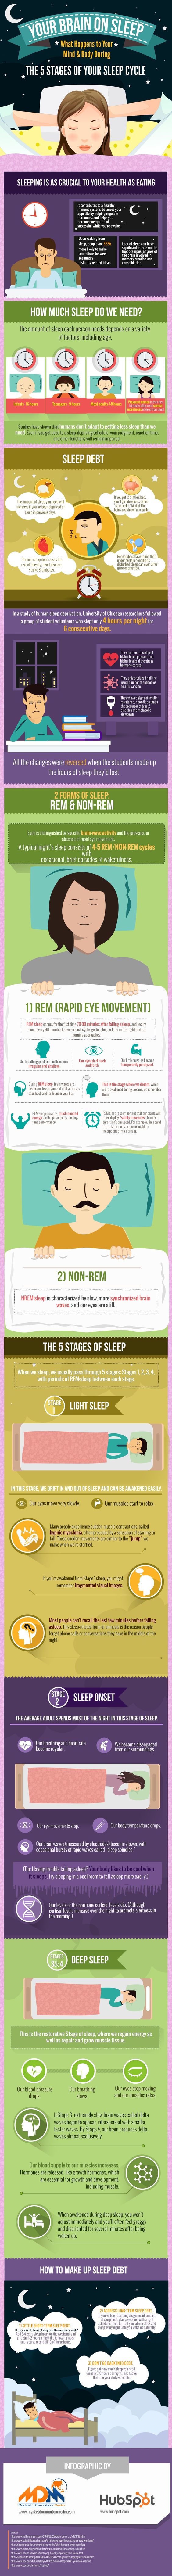 five stages of sleep cycle